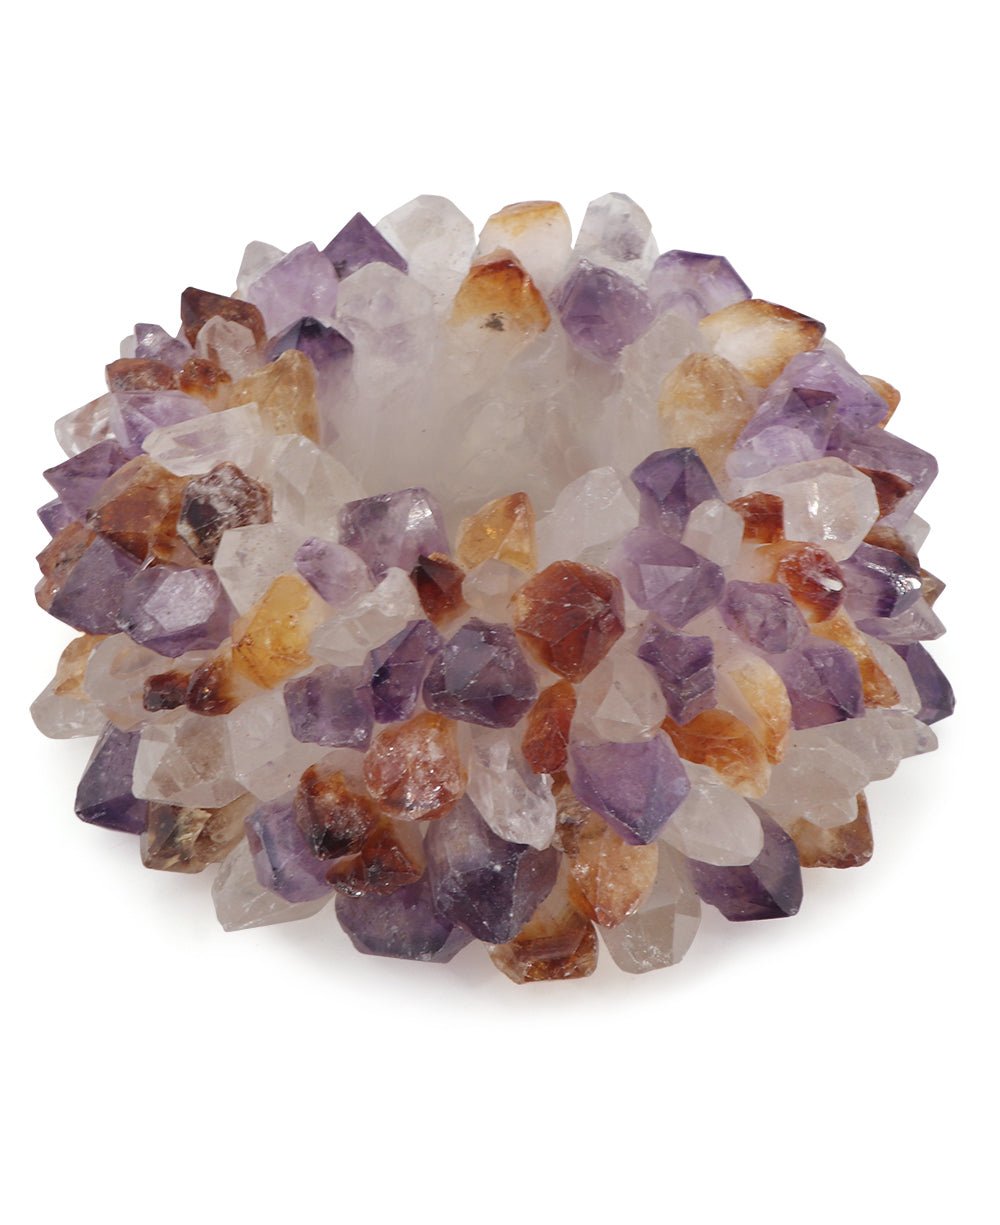 Amethyst, Citrine, and Clear Quartz Gemstone Candleholder - Candle Holders